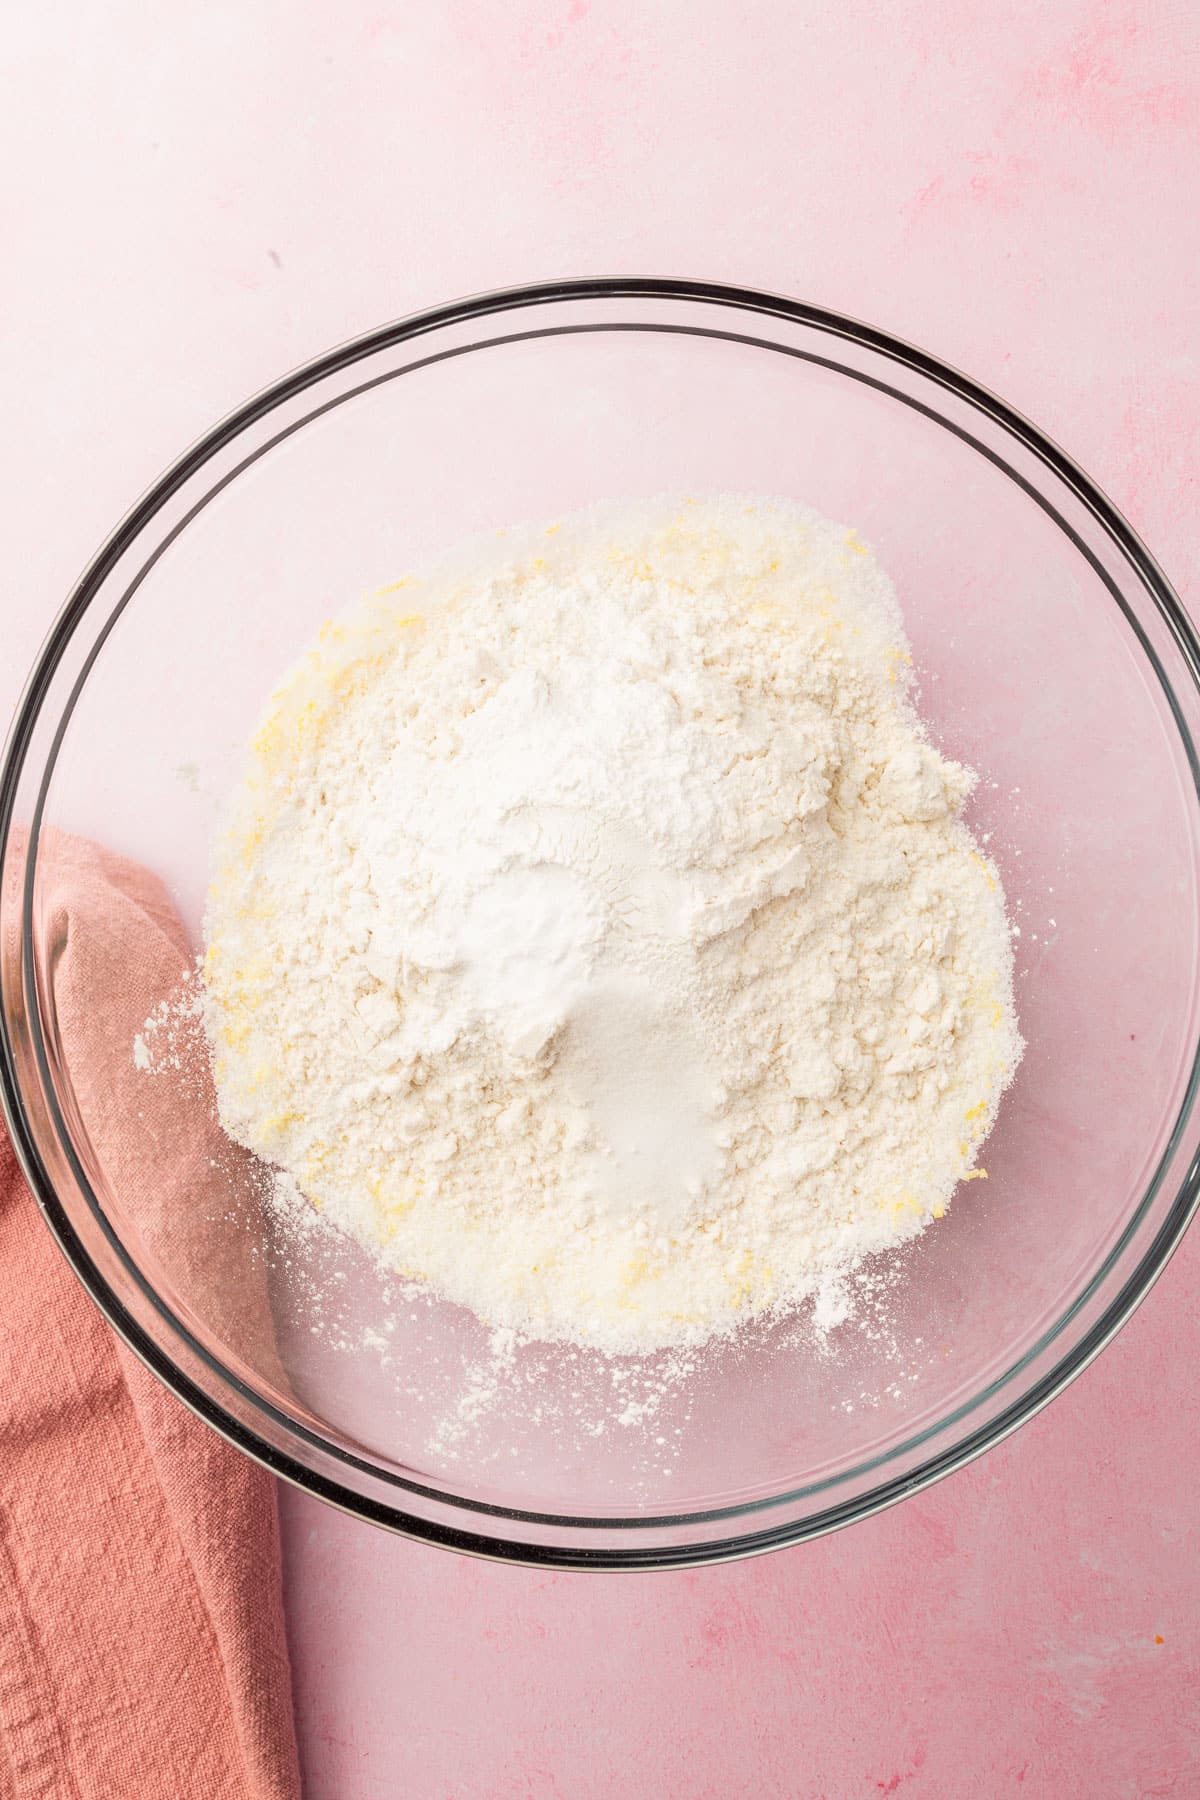 A glass mixing bowl with granulated sugar, lemon zest, gluten-free flour, baking powder, baking soda, and salt in it before mixing together.